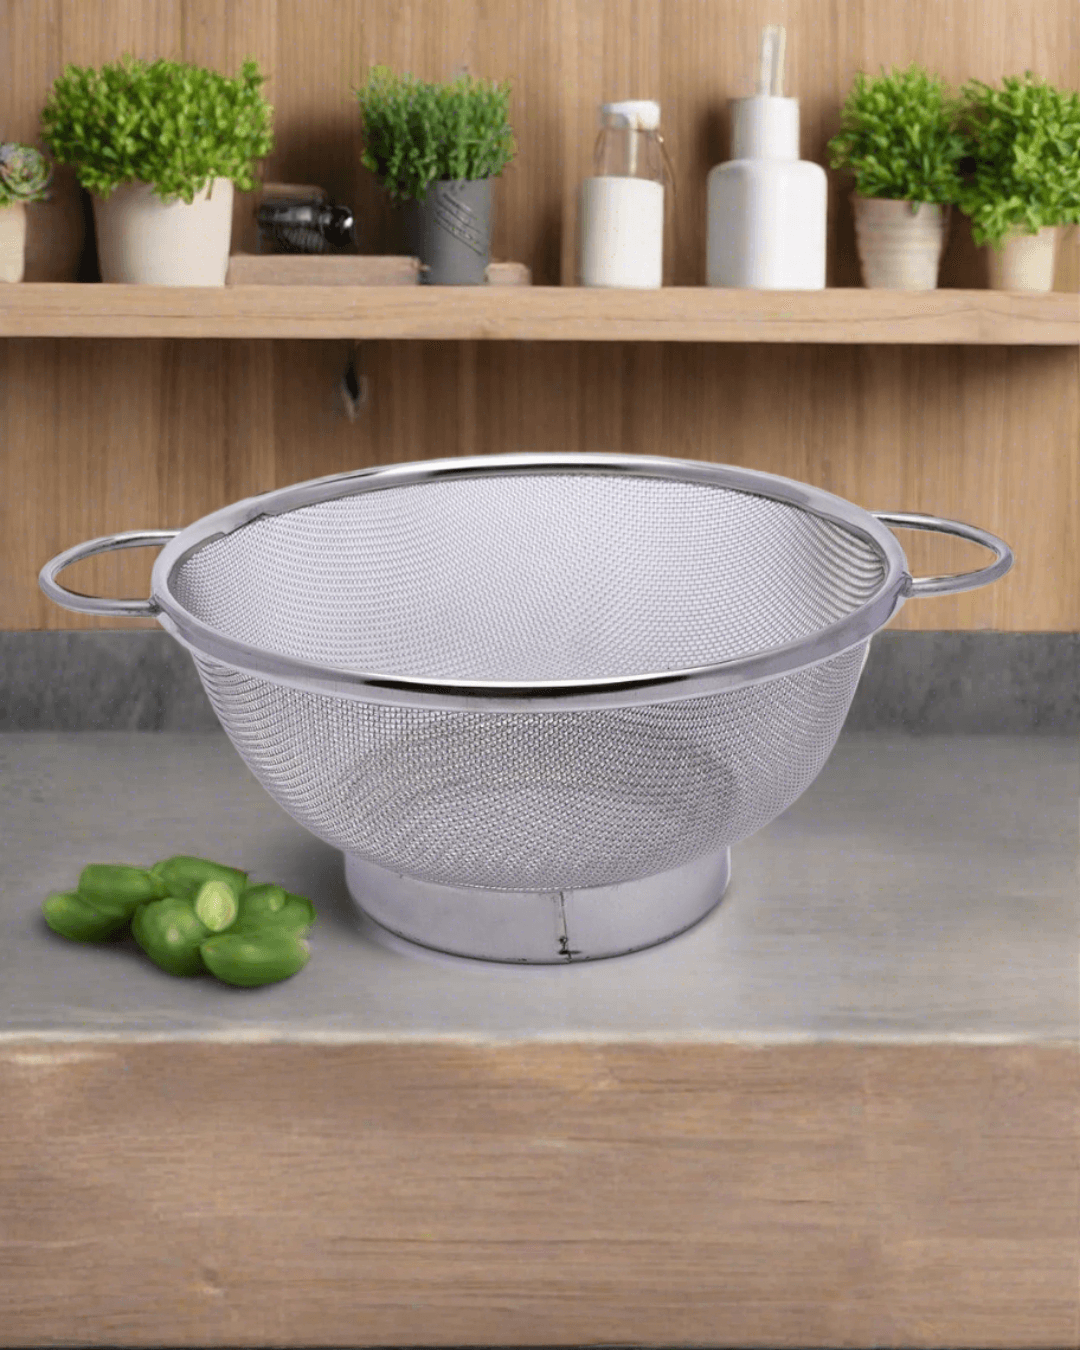 stainless-steel-colander-precision-pierced-strainer-for-pasta-rice-and-fruits-wide-rim-and-handles-steaming-draining-and-rinsing-silver-stainless-steel-colander-1-29021082321066_2024.png